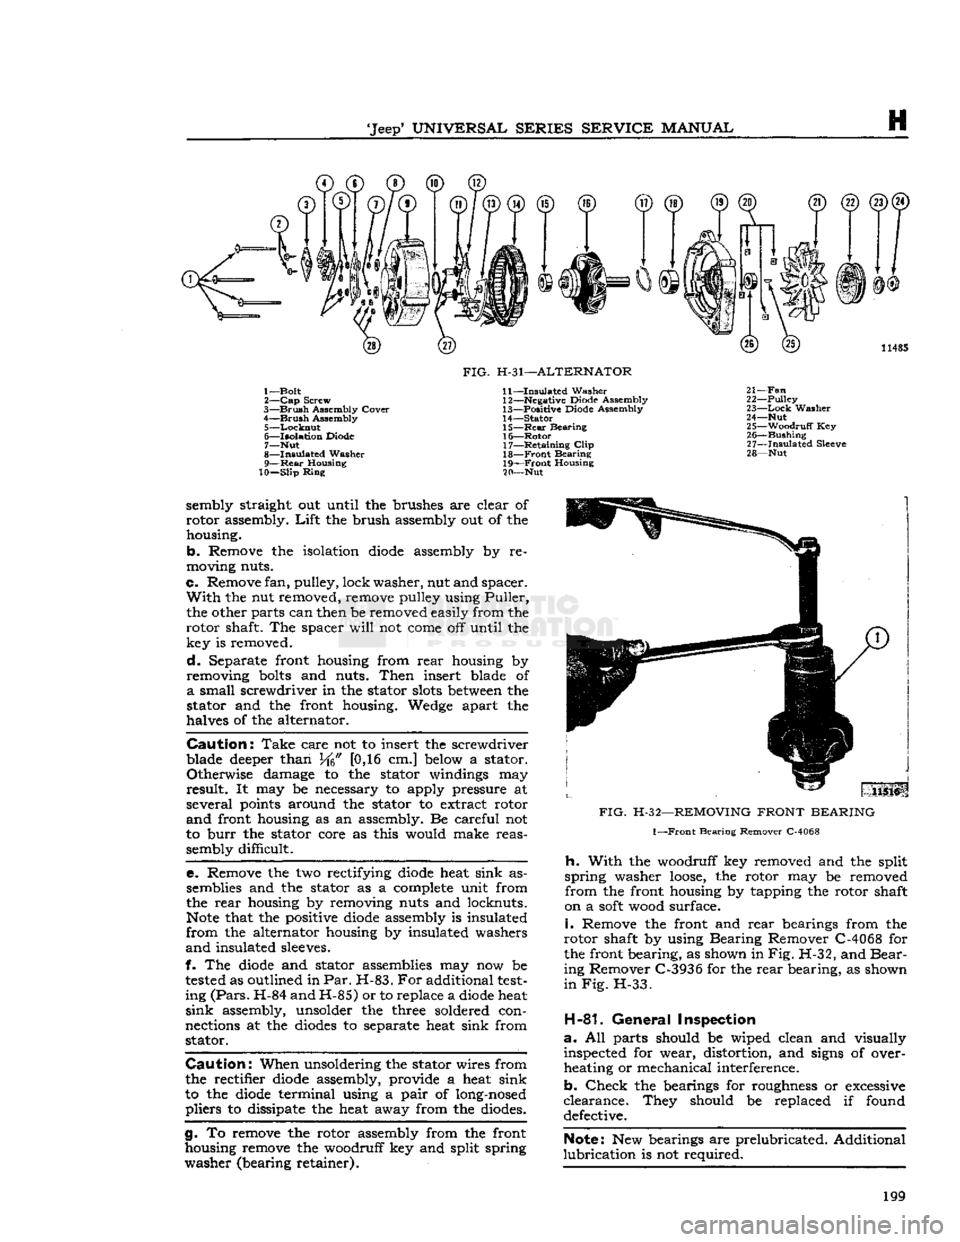 JEEP CJ 1953  Service Manual 
Jeep
 UNIVERSAL
 SERIES SERVICE
 MANUAL 

H 

©
 © © ® (a 
1—
 Bolt 

2— Cap
 Screw 

3—
 Brush
 Assembly
 Cover 

4—
 Brush
 Assembly 
5—
 Locknut 

6—
 Isolation
 Diode 7— Nut 
